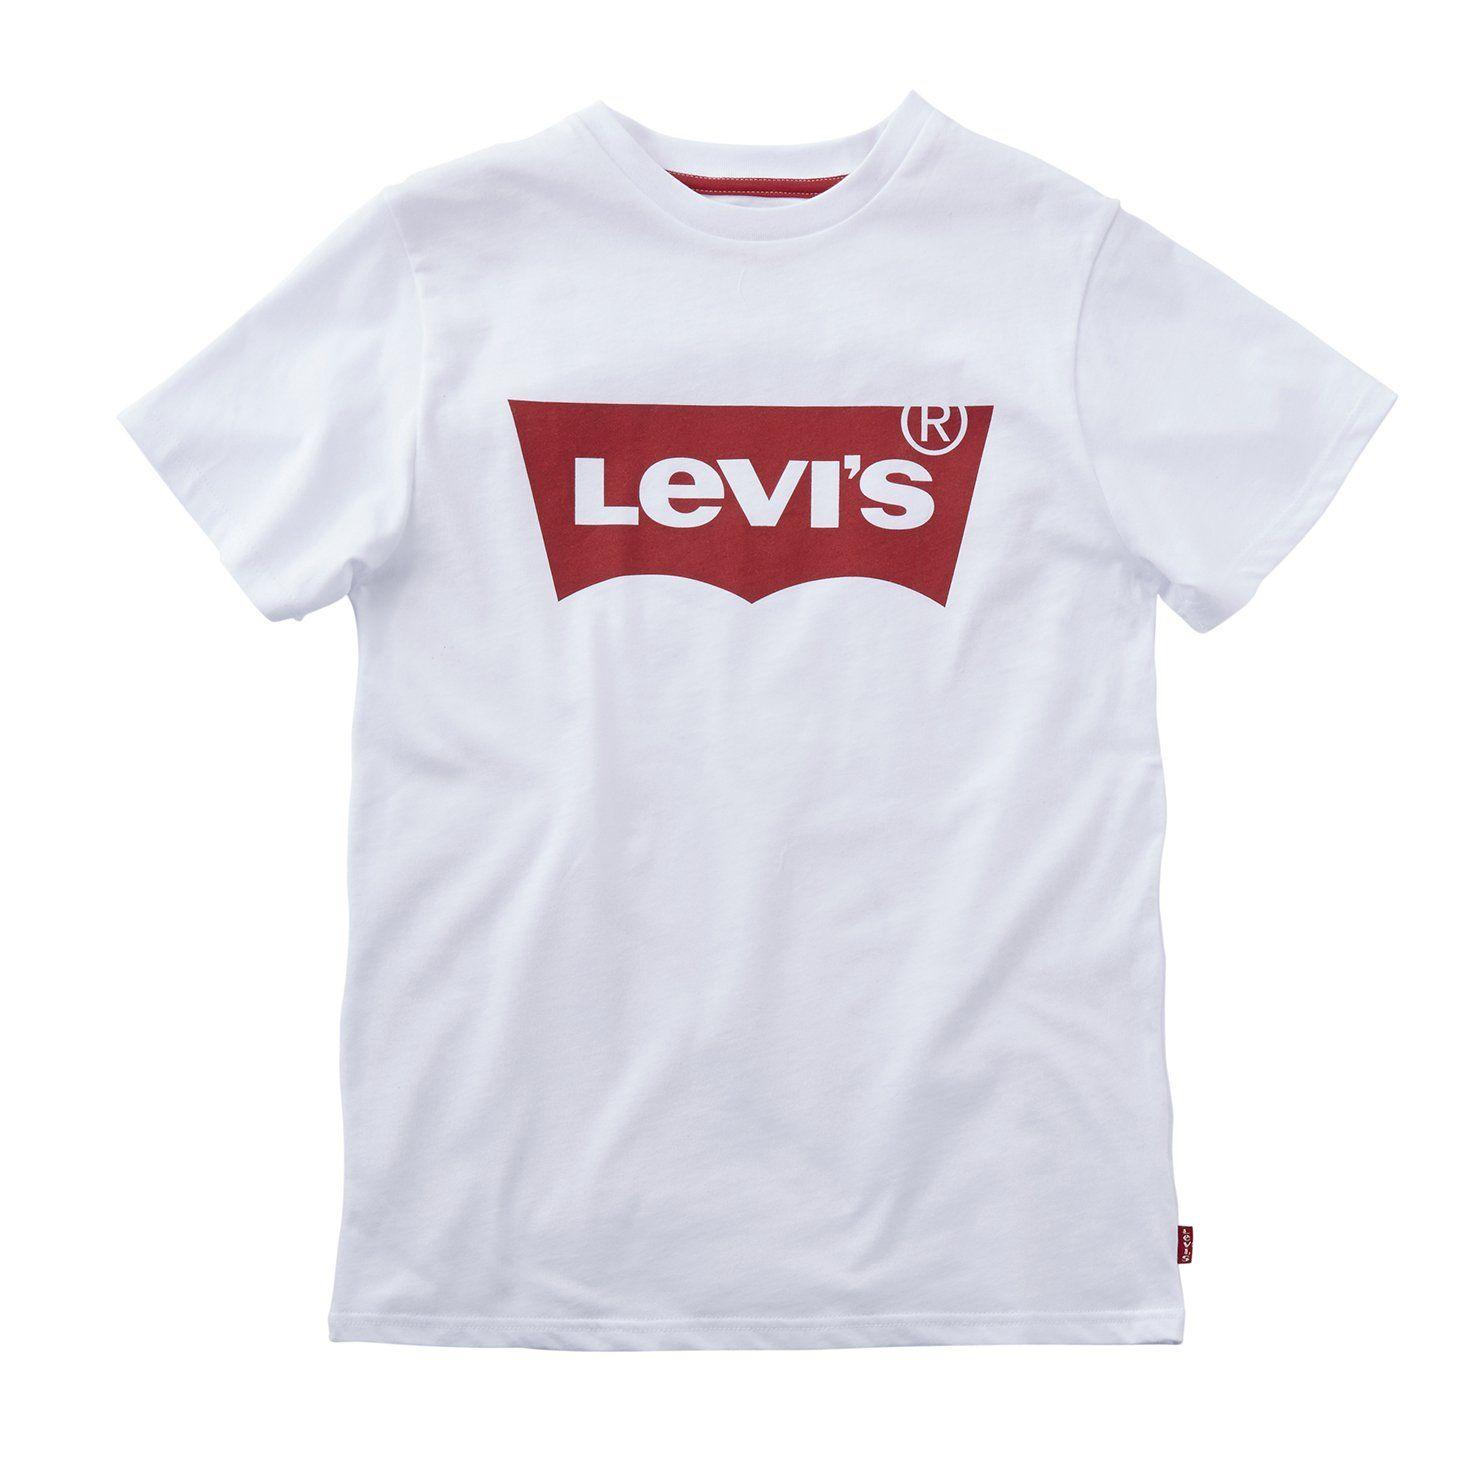 Whiye and Red a Logo - SS18 Levi's Boys White & Red Logo T-Shirt – Liquorice Kids